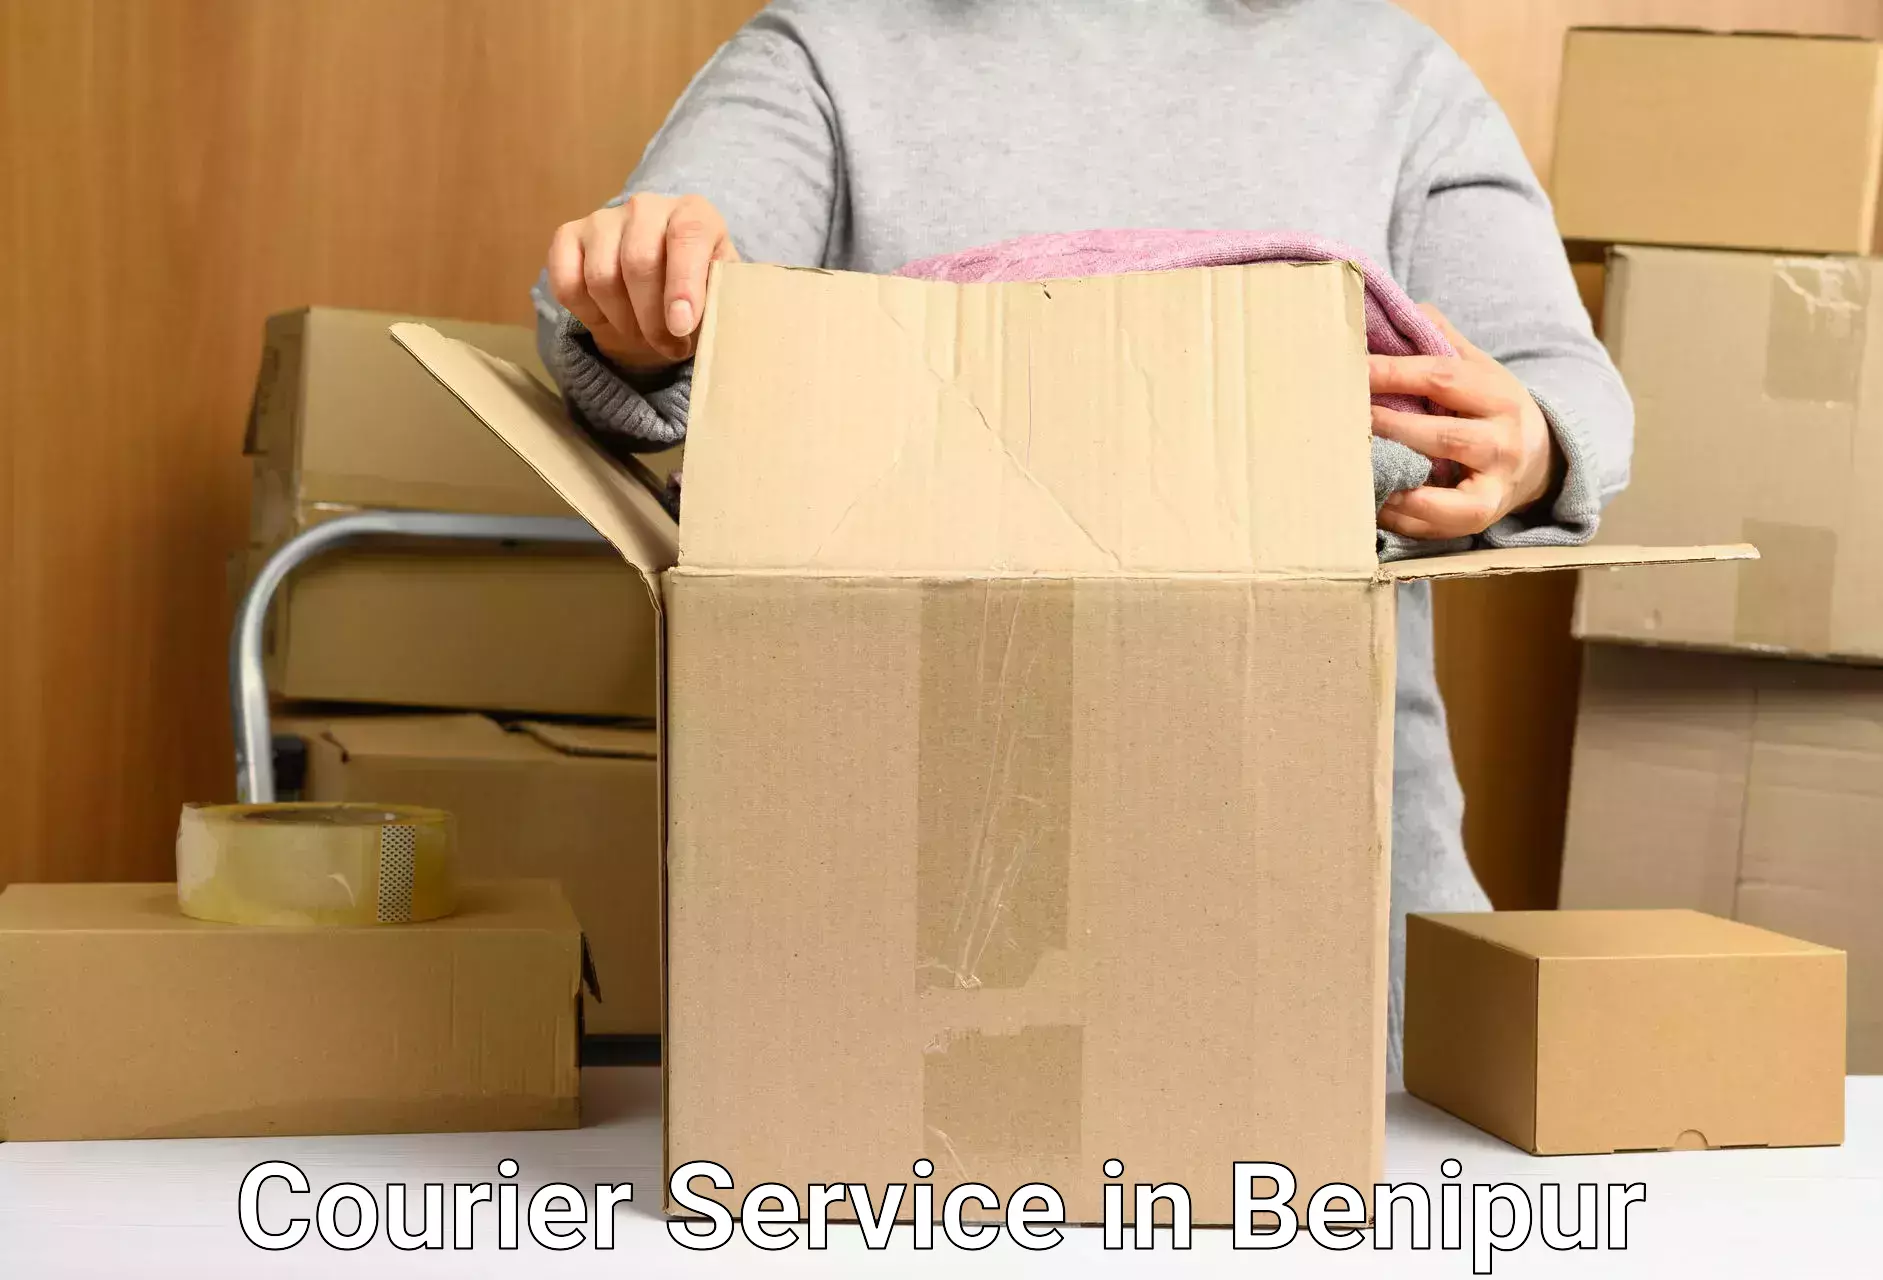 Customized delivery options in Benipur